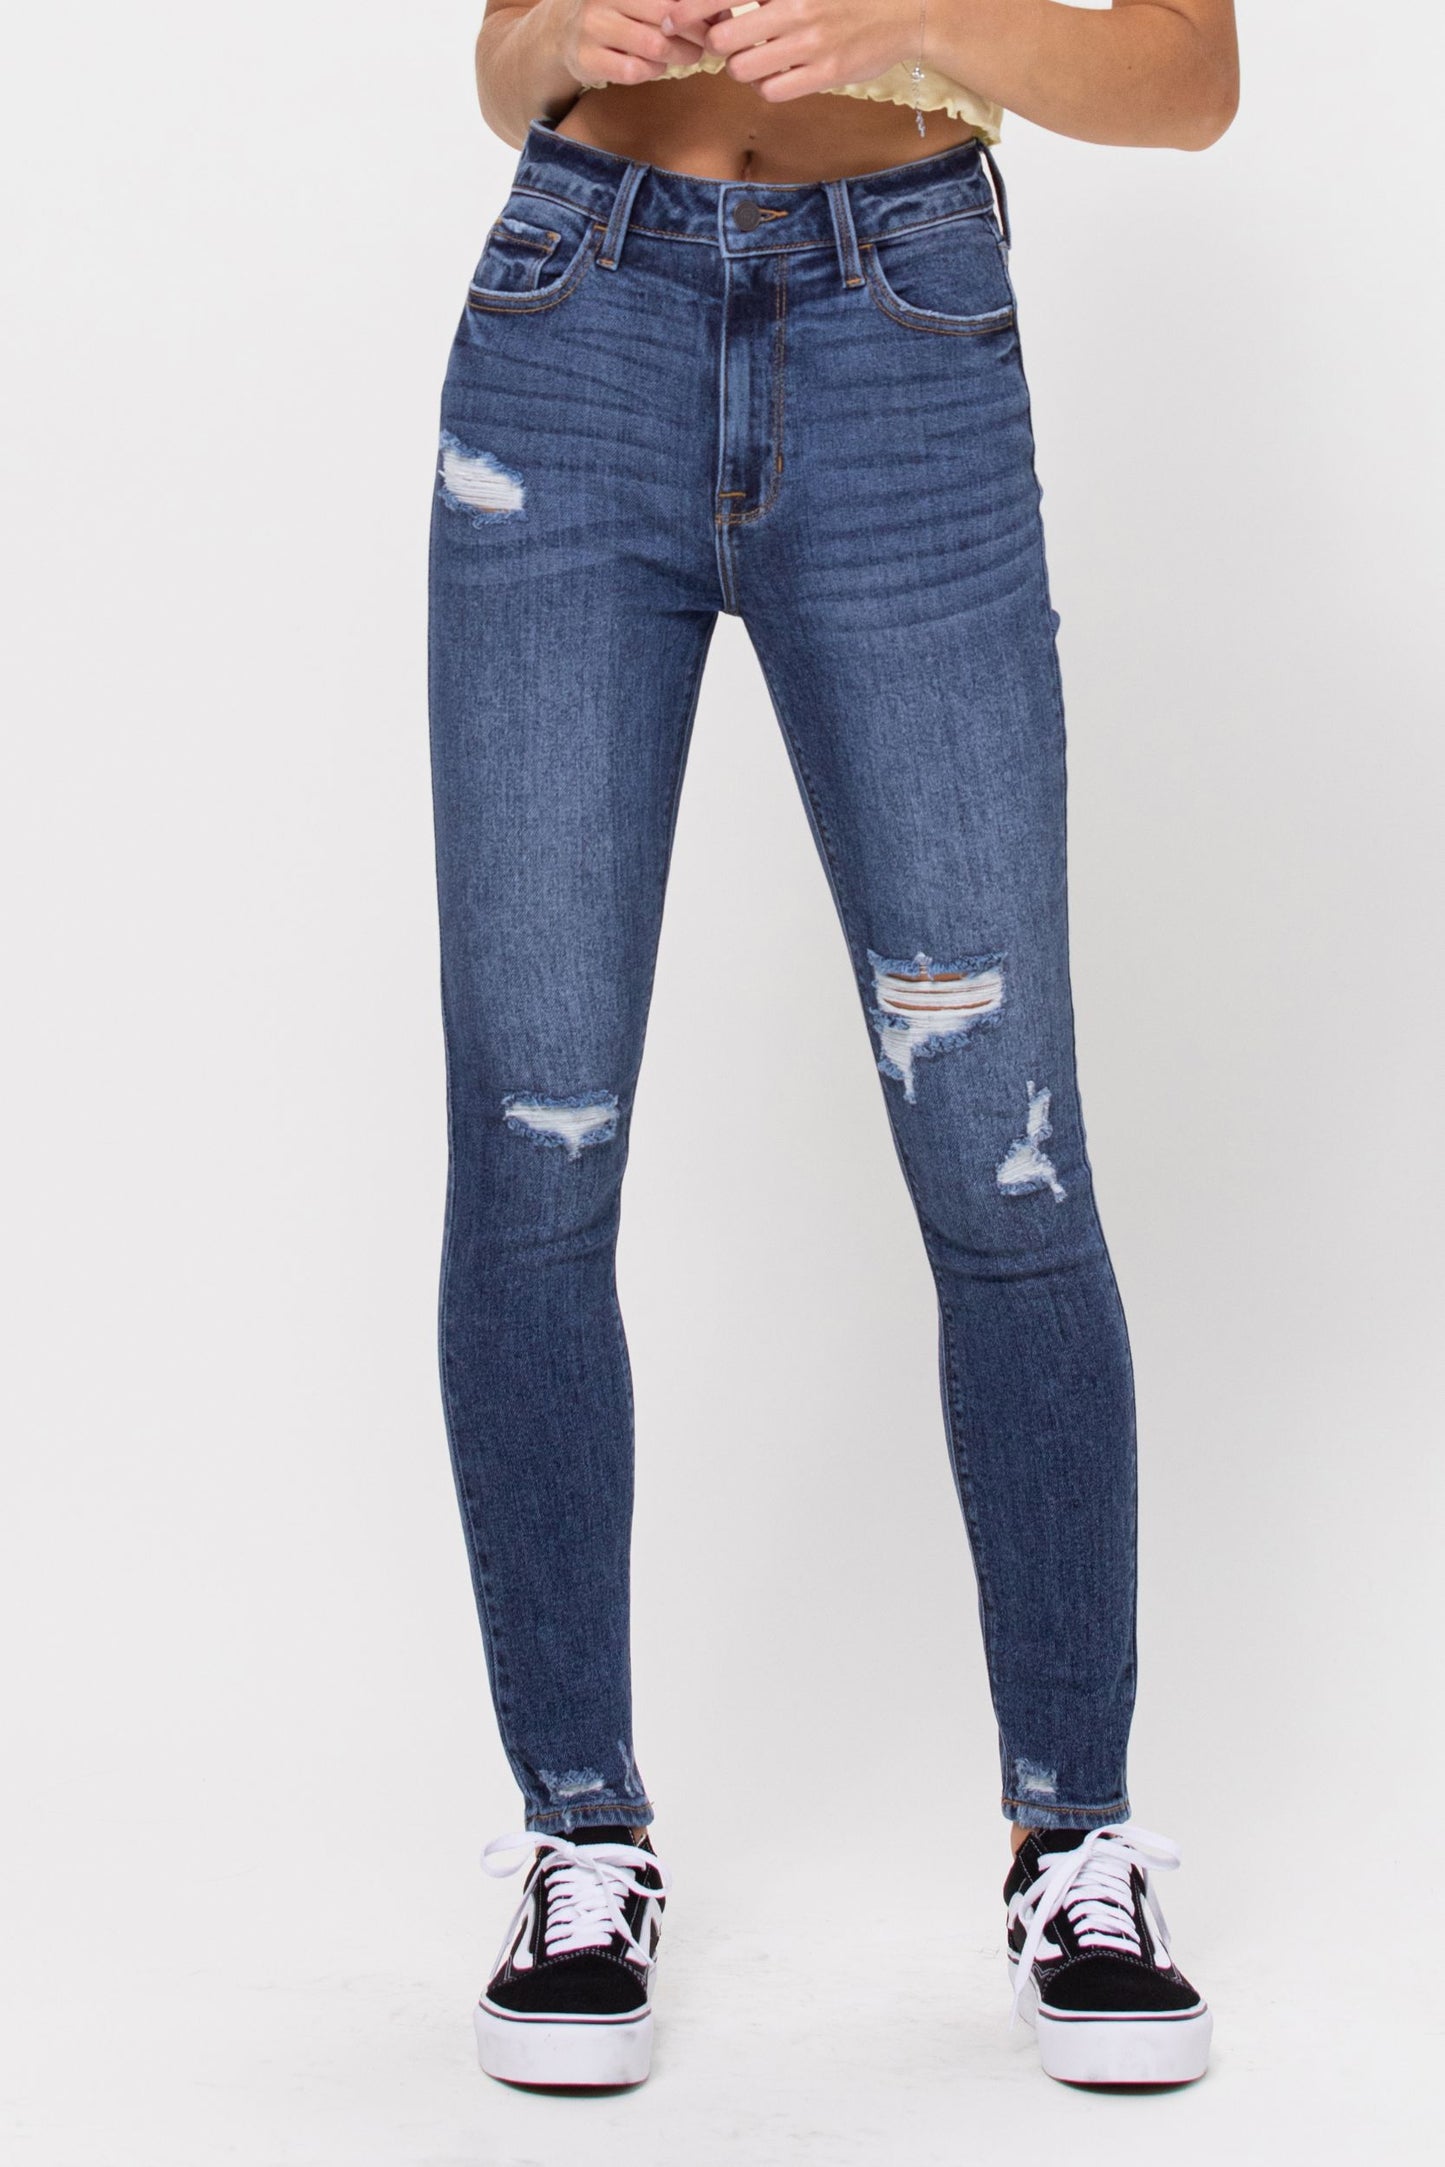 Cello Millie High Rise Destroyed Skinny Jean - Weeping Willow Boutique